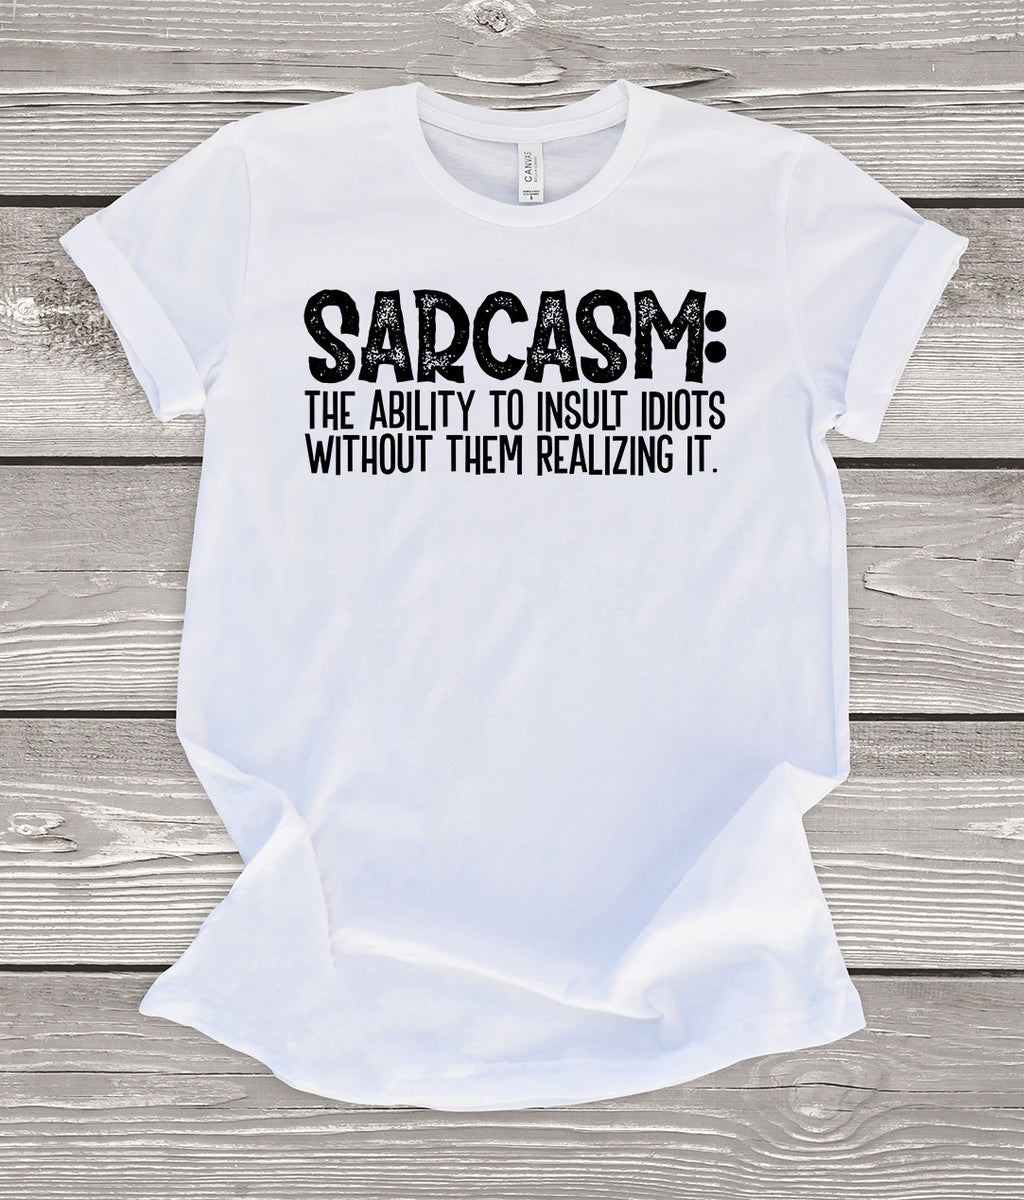 Sarcasm: The Ability To Insult Idiots Without Them Realizing It White T-Shirt